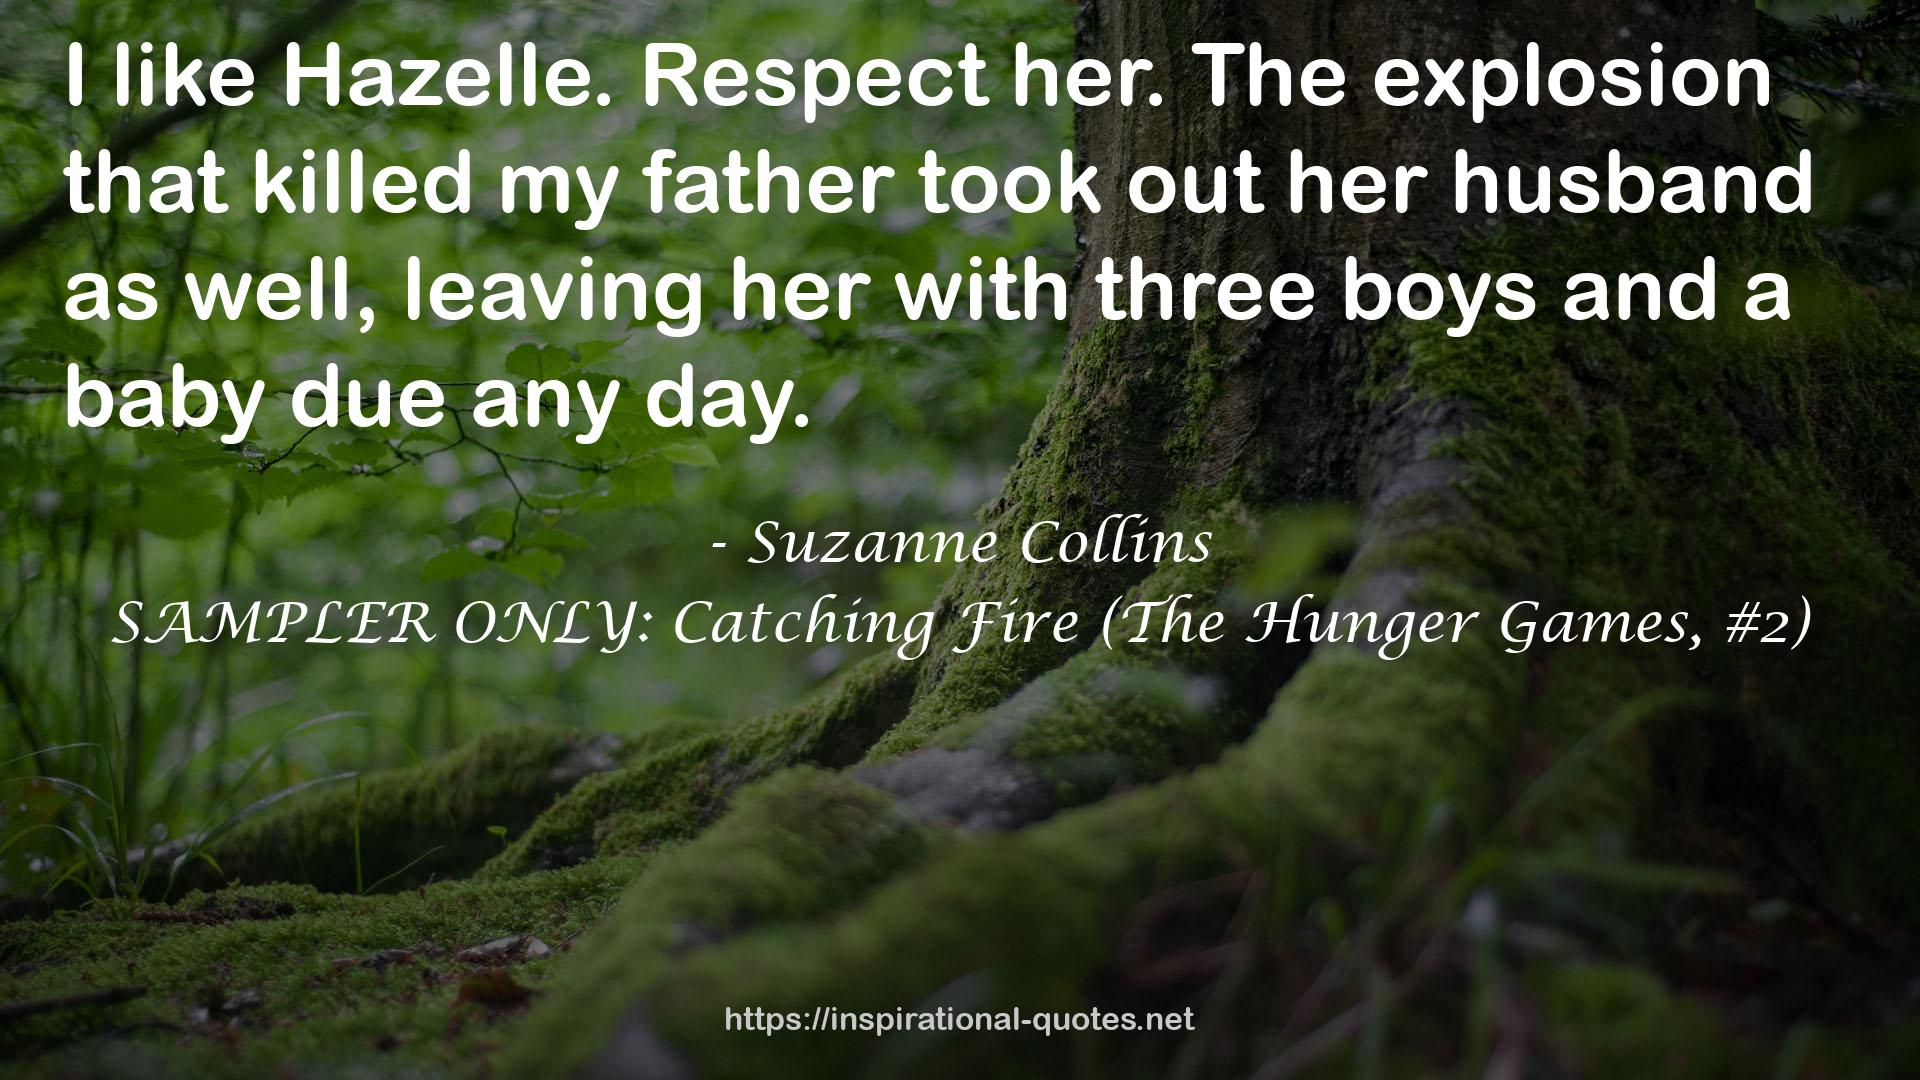 SAMPLER ONLY: Catching Fire (The Hunger Games, #2) QUOTES